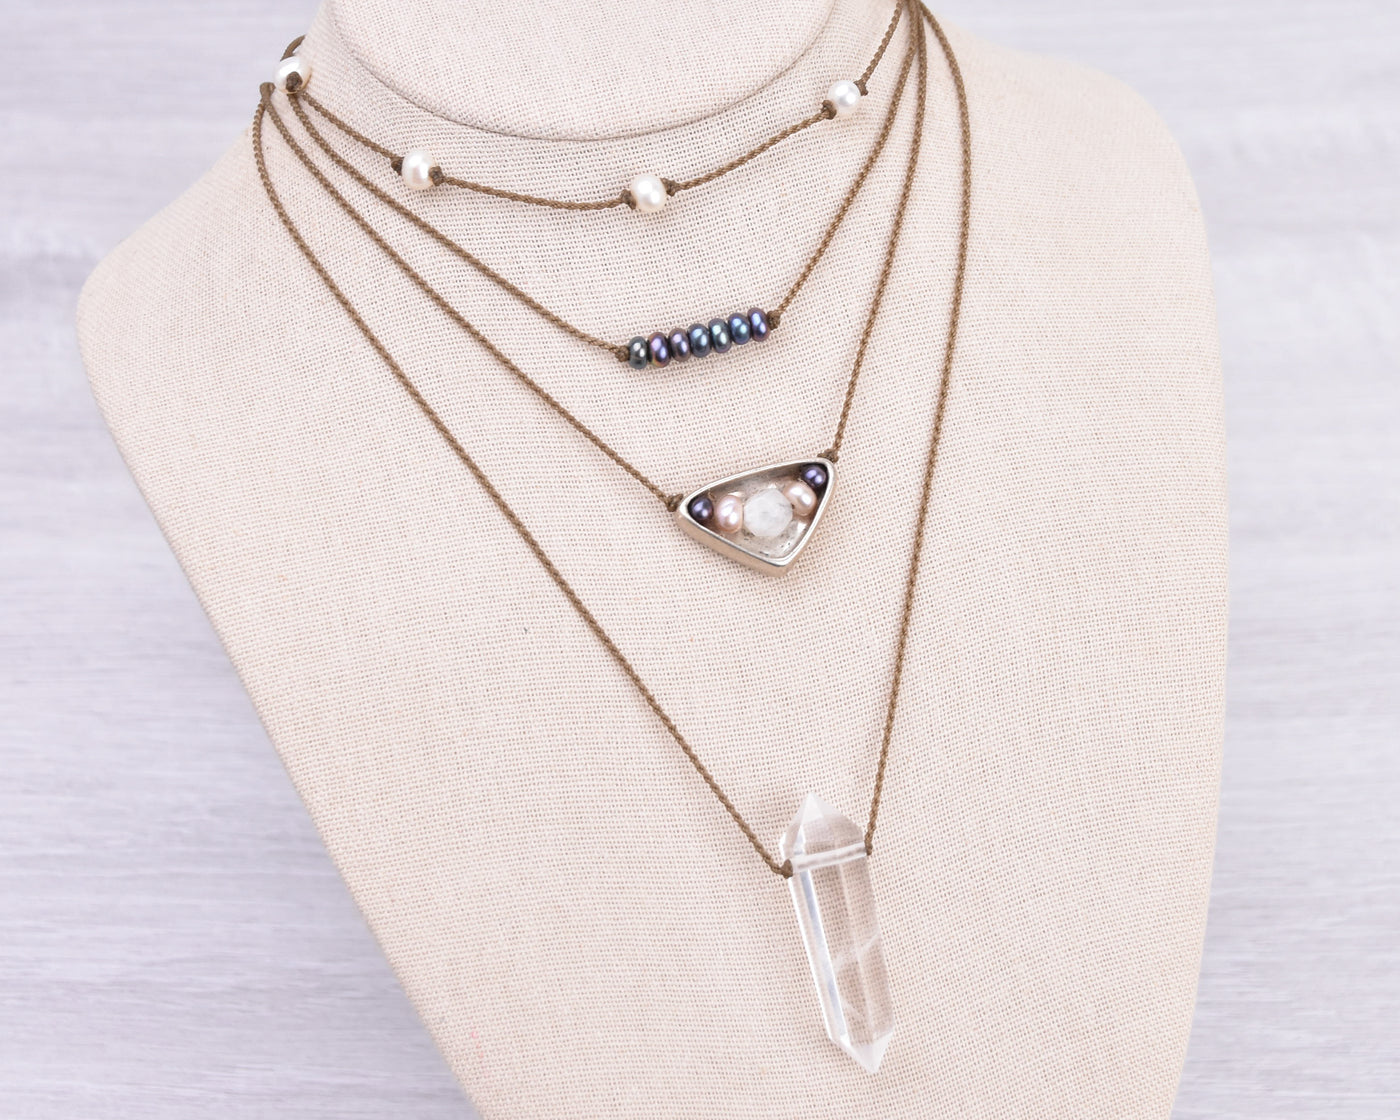 The Perfect Stack - Necklace Stack